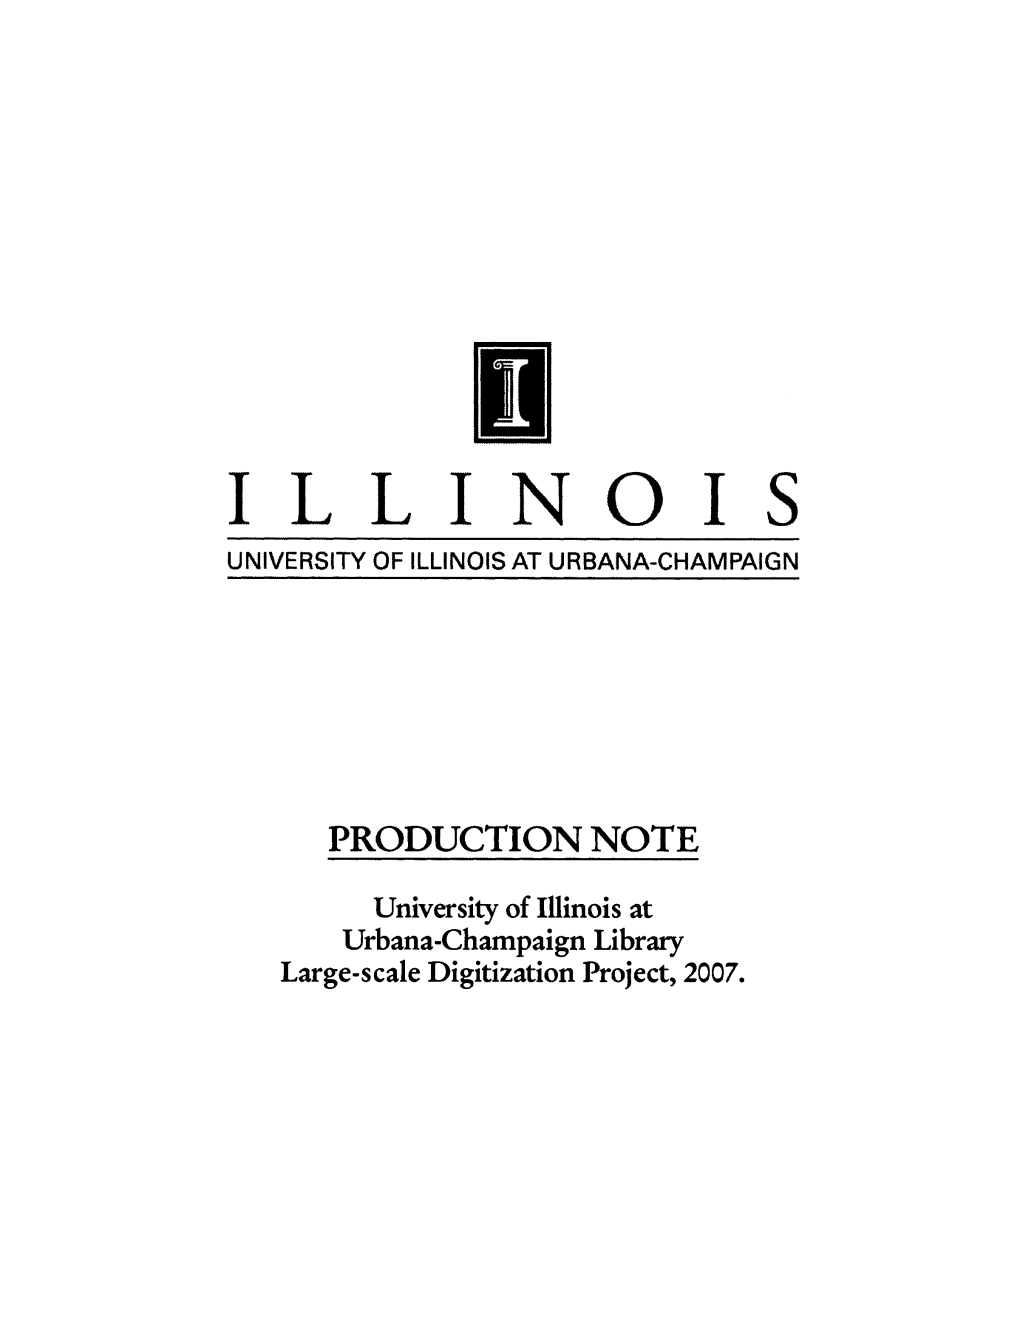 The Development of Library Resources at Northwestern University, by William V, Jackson (Feb